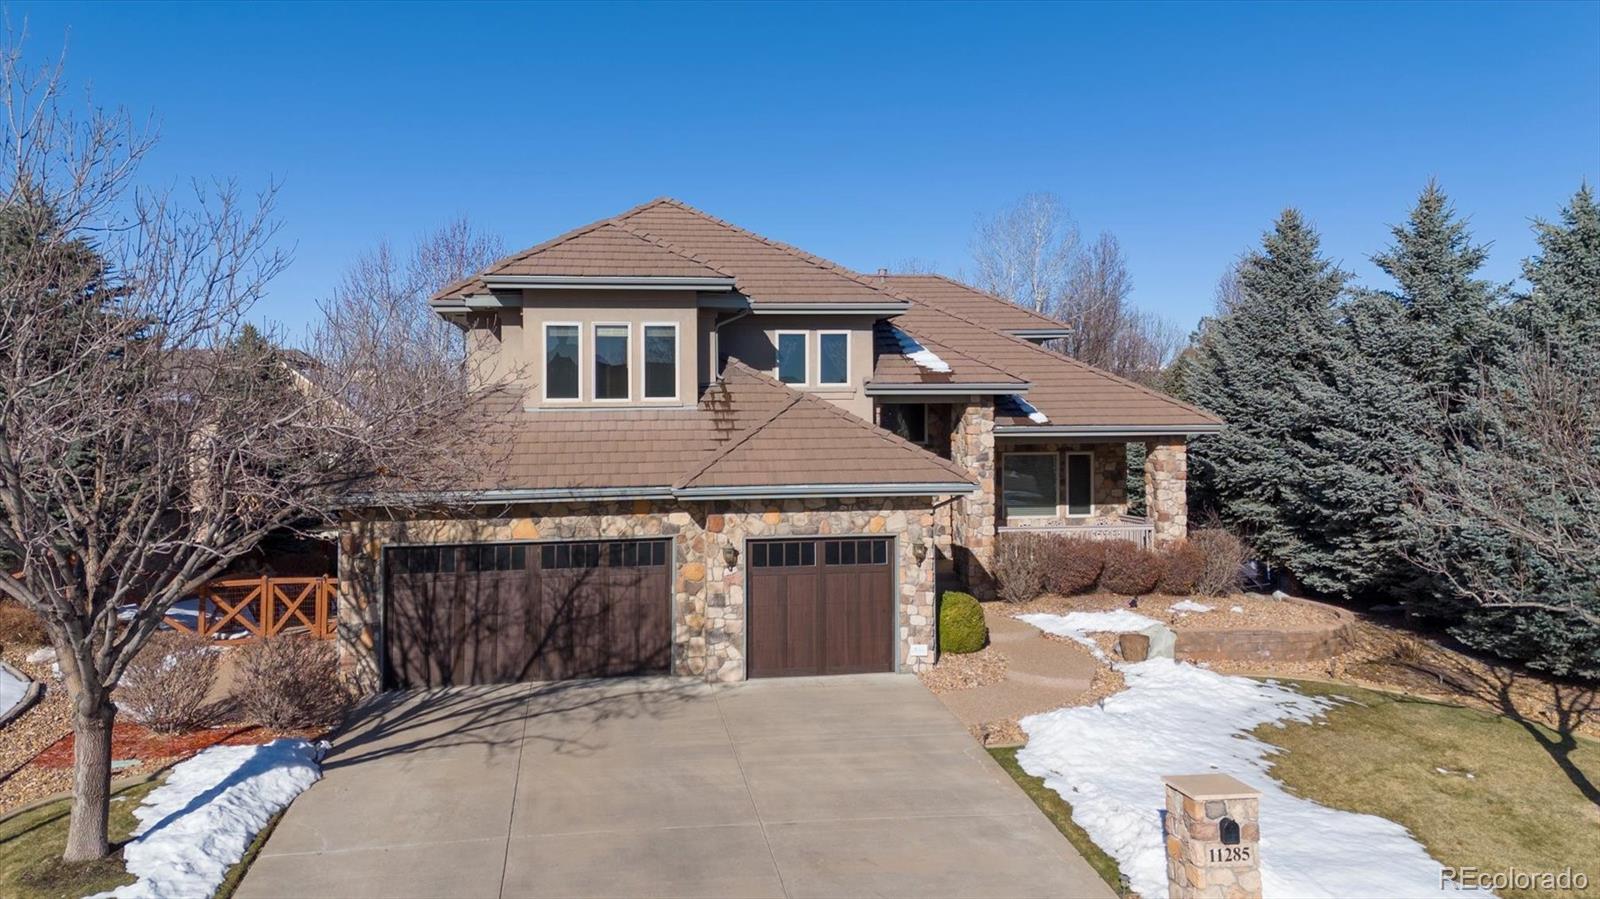 Report Image for 11285  Clay Court,Westminster, Colorado